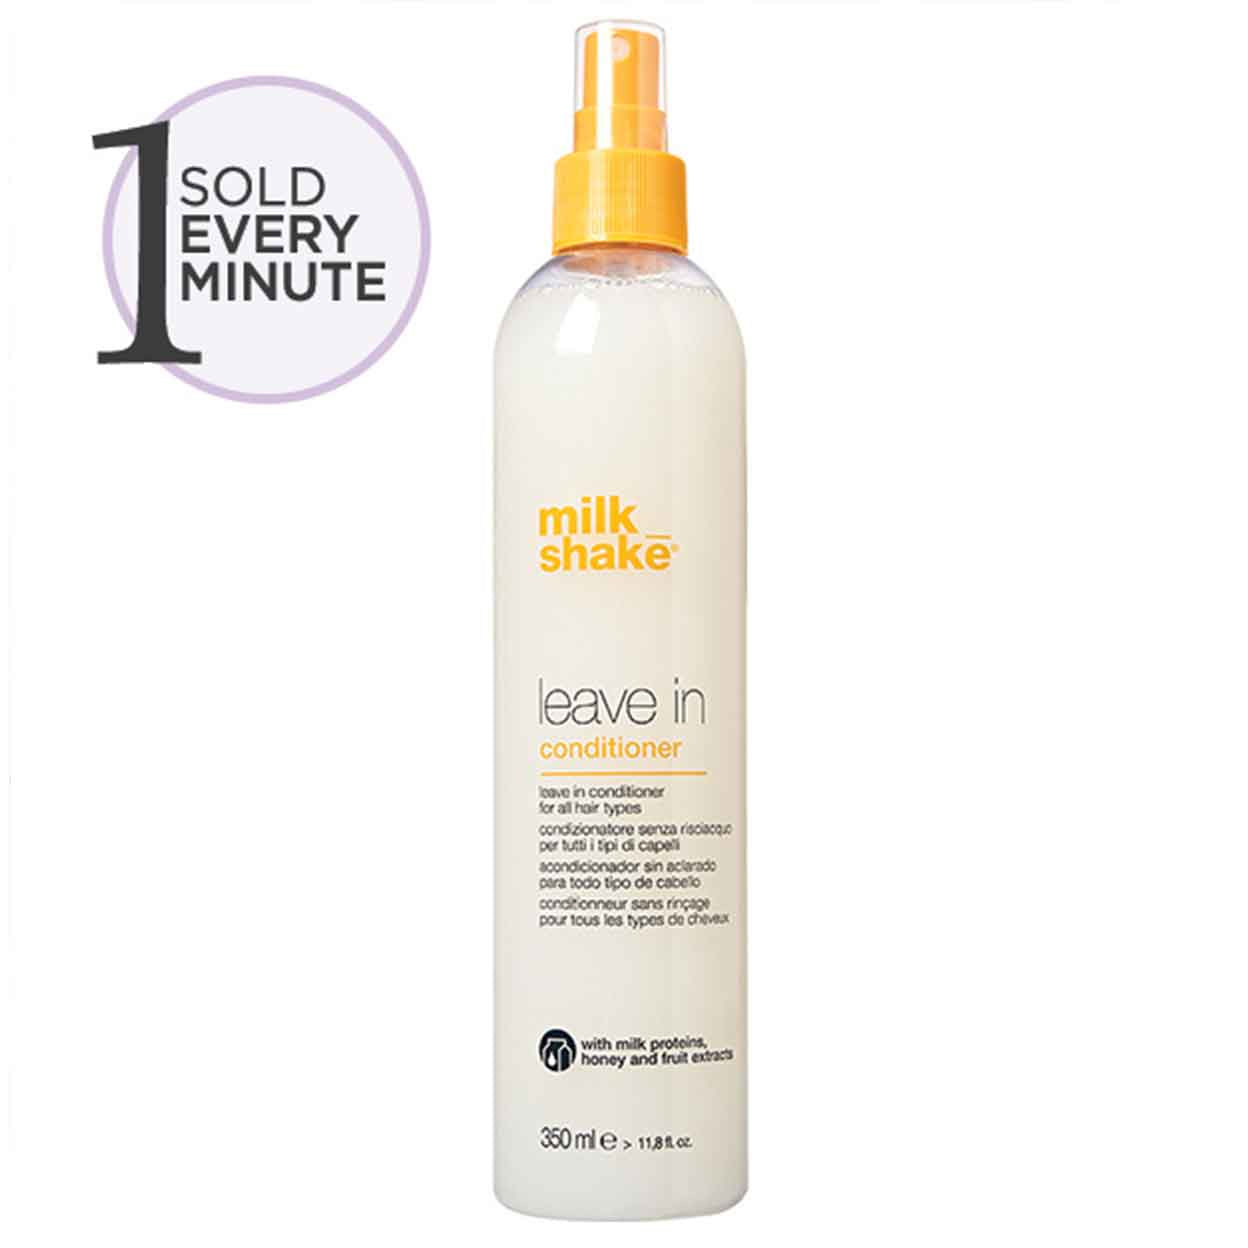 milk_shake Leave-In Conditioner Detangler Spray for Natural Hair - Leave In Conditioner for Curly Hair or Straight Hair - Protects and Hydrates Color Treated and Dry Hair, 11.8 Fl Oz